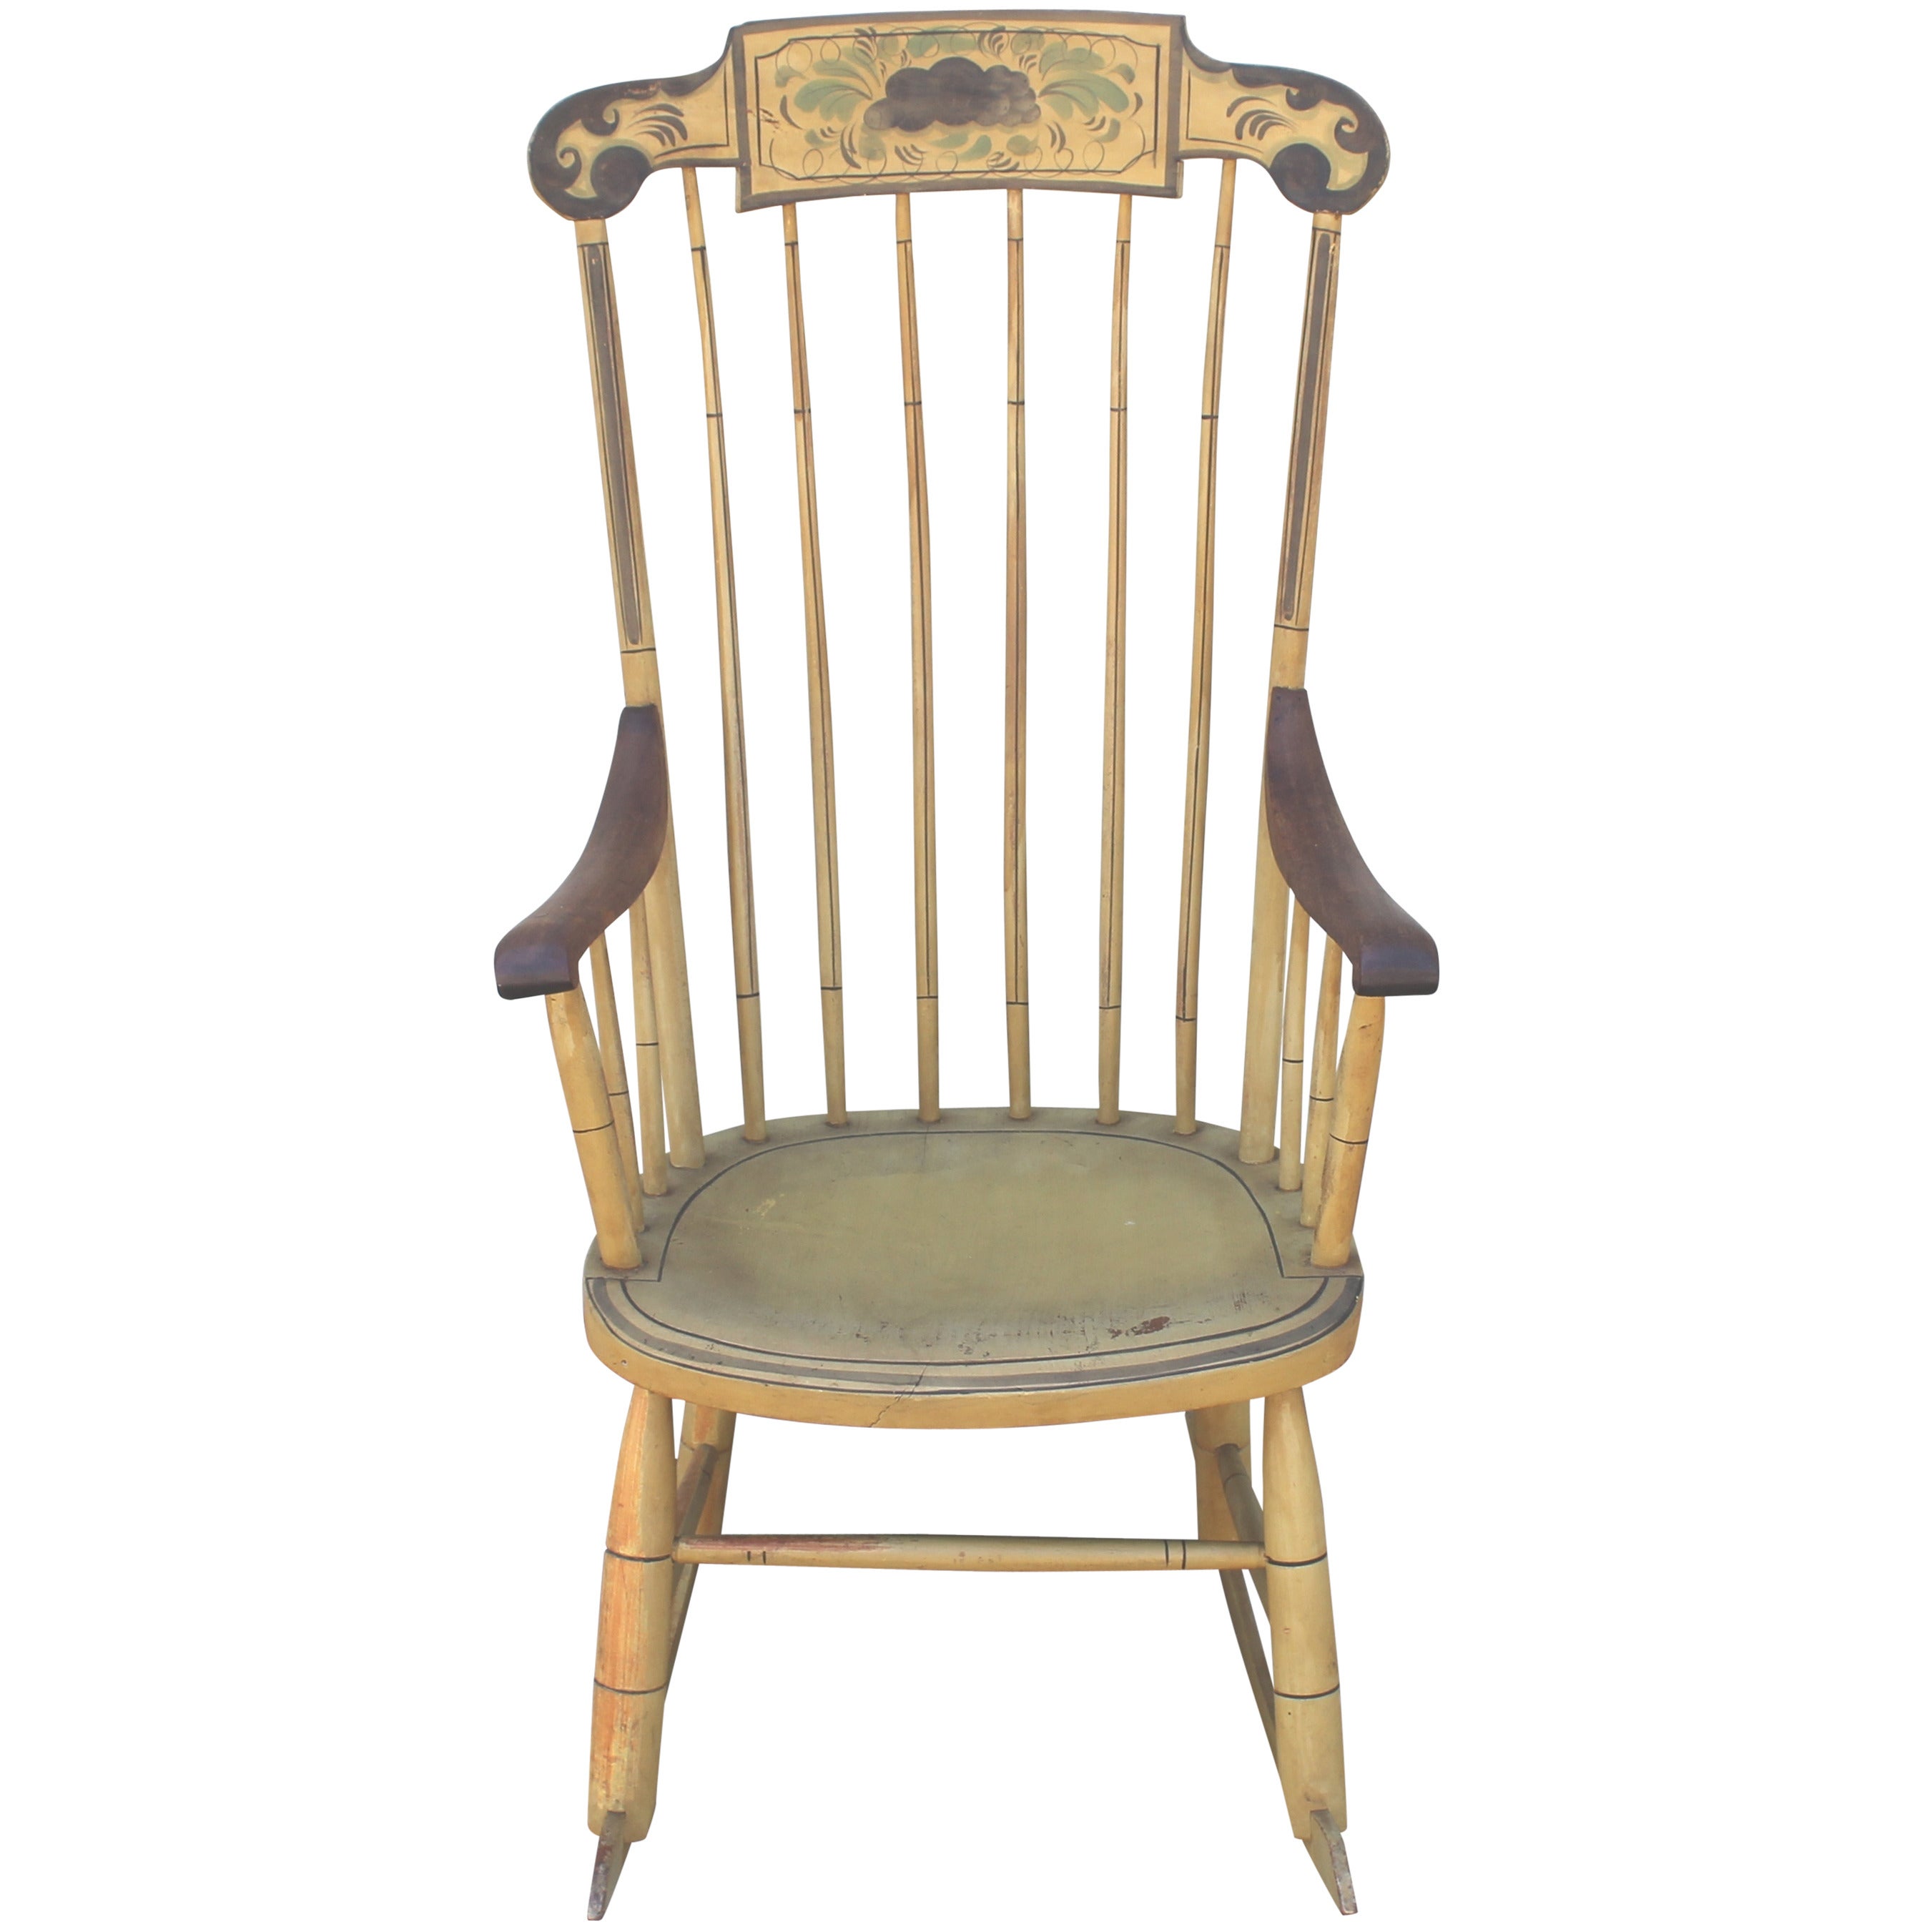 19th Century Fancy Original Painted Rocking Chair from New England